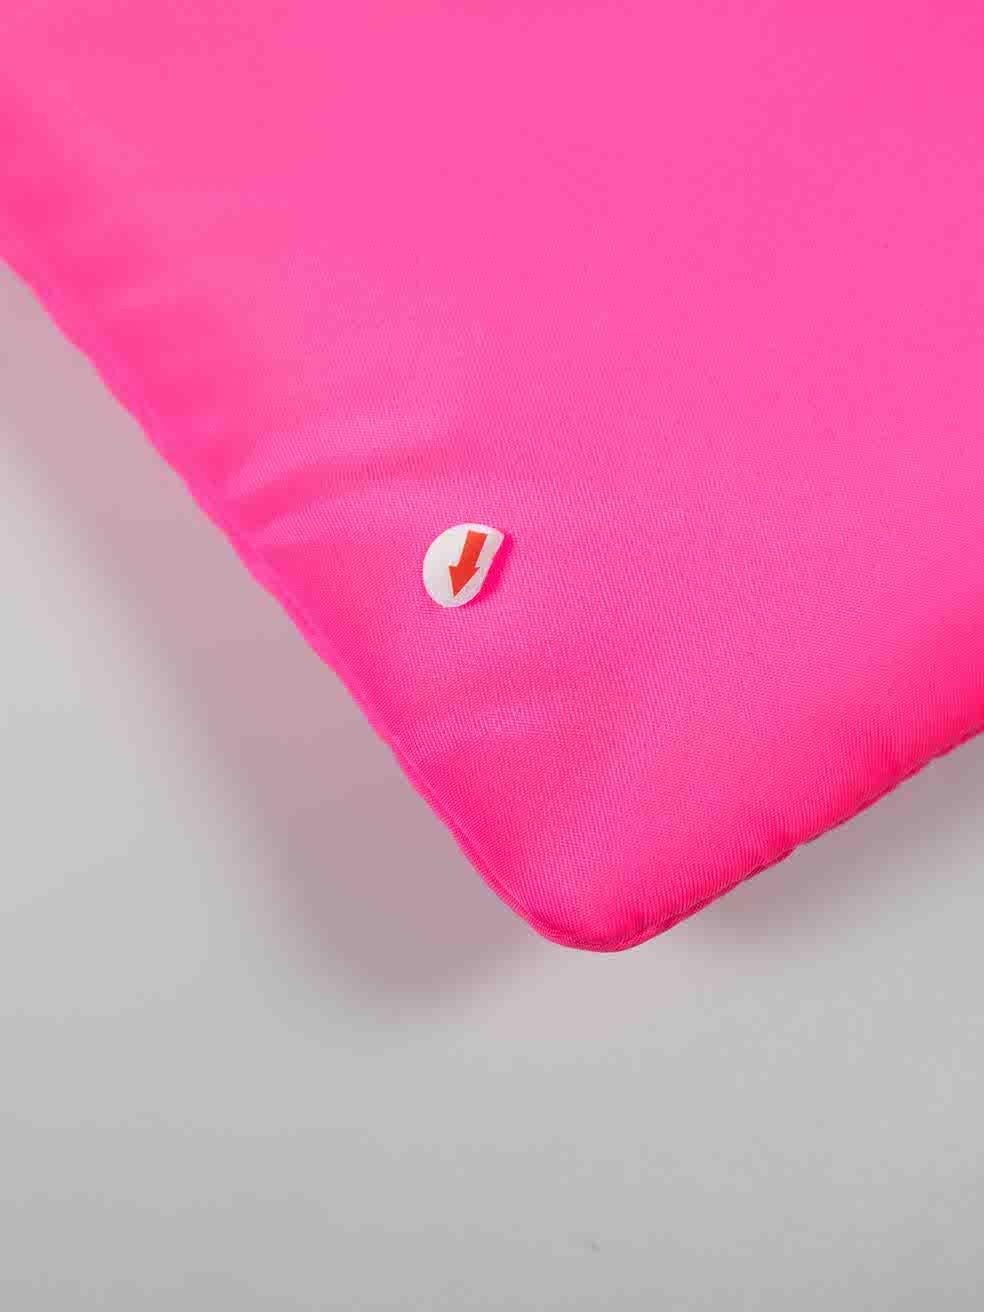 Prada Neon Pink Padded Clutch with Chain For Sale 3